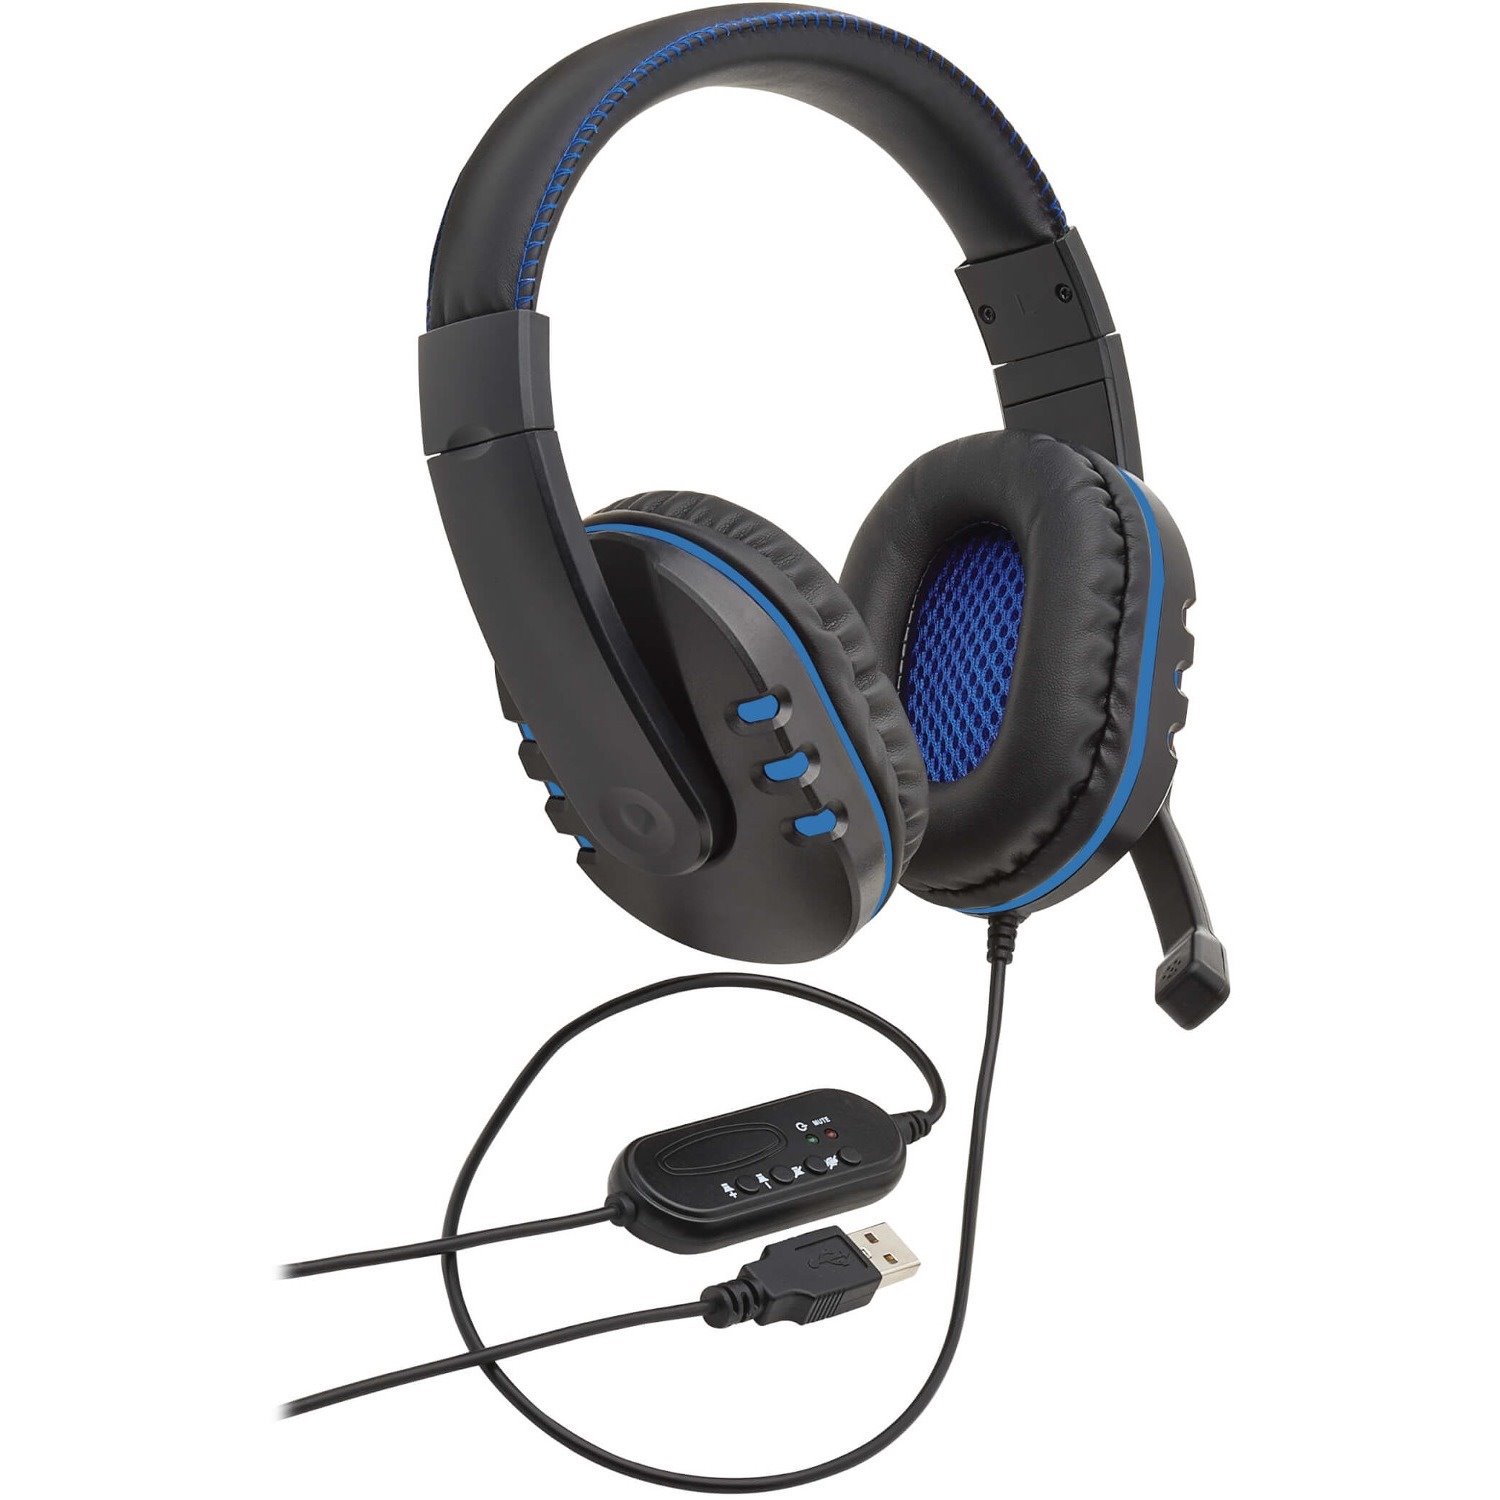 Tripp Lite by Eaton USB Gaming Headset with Built-In Microphone and Audio Control